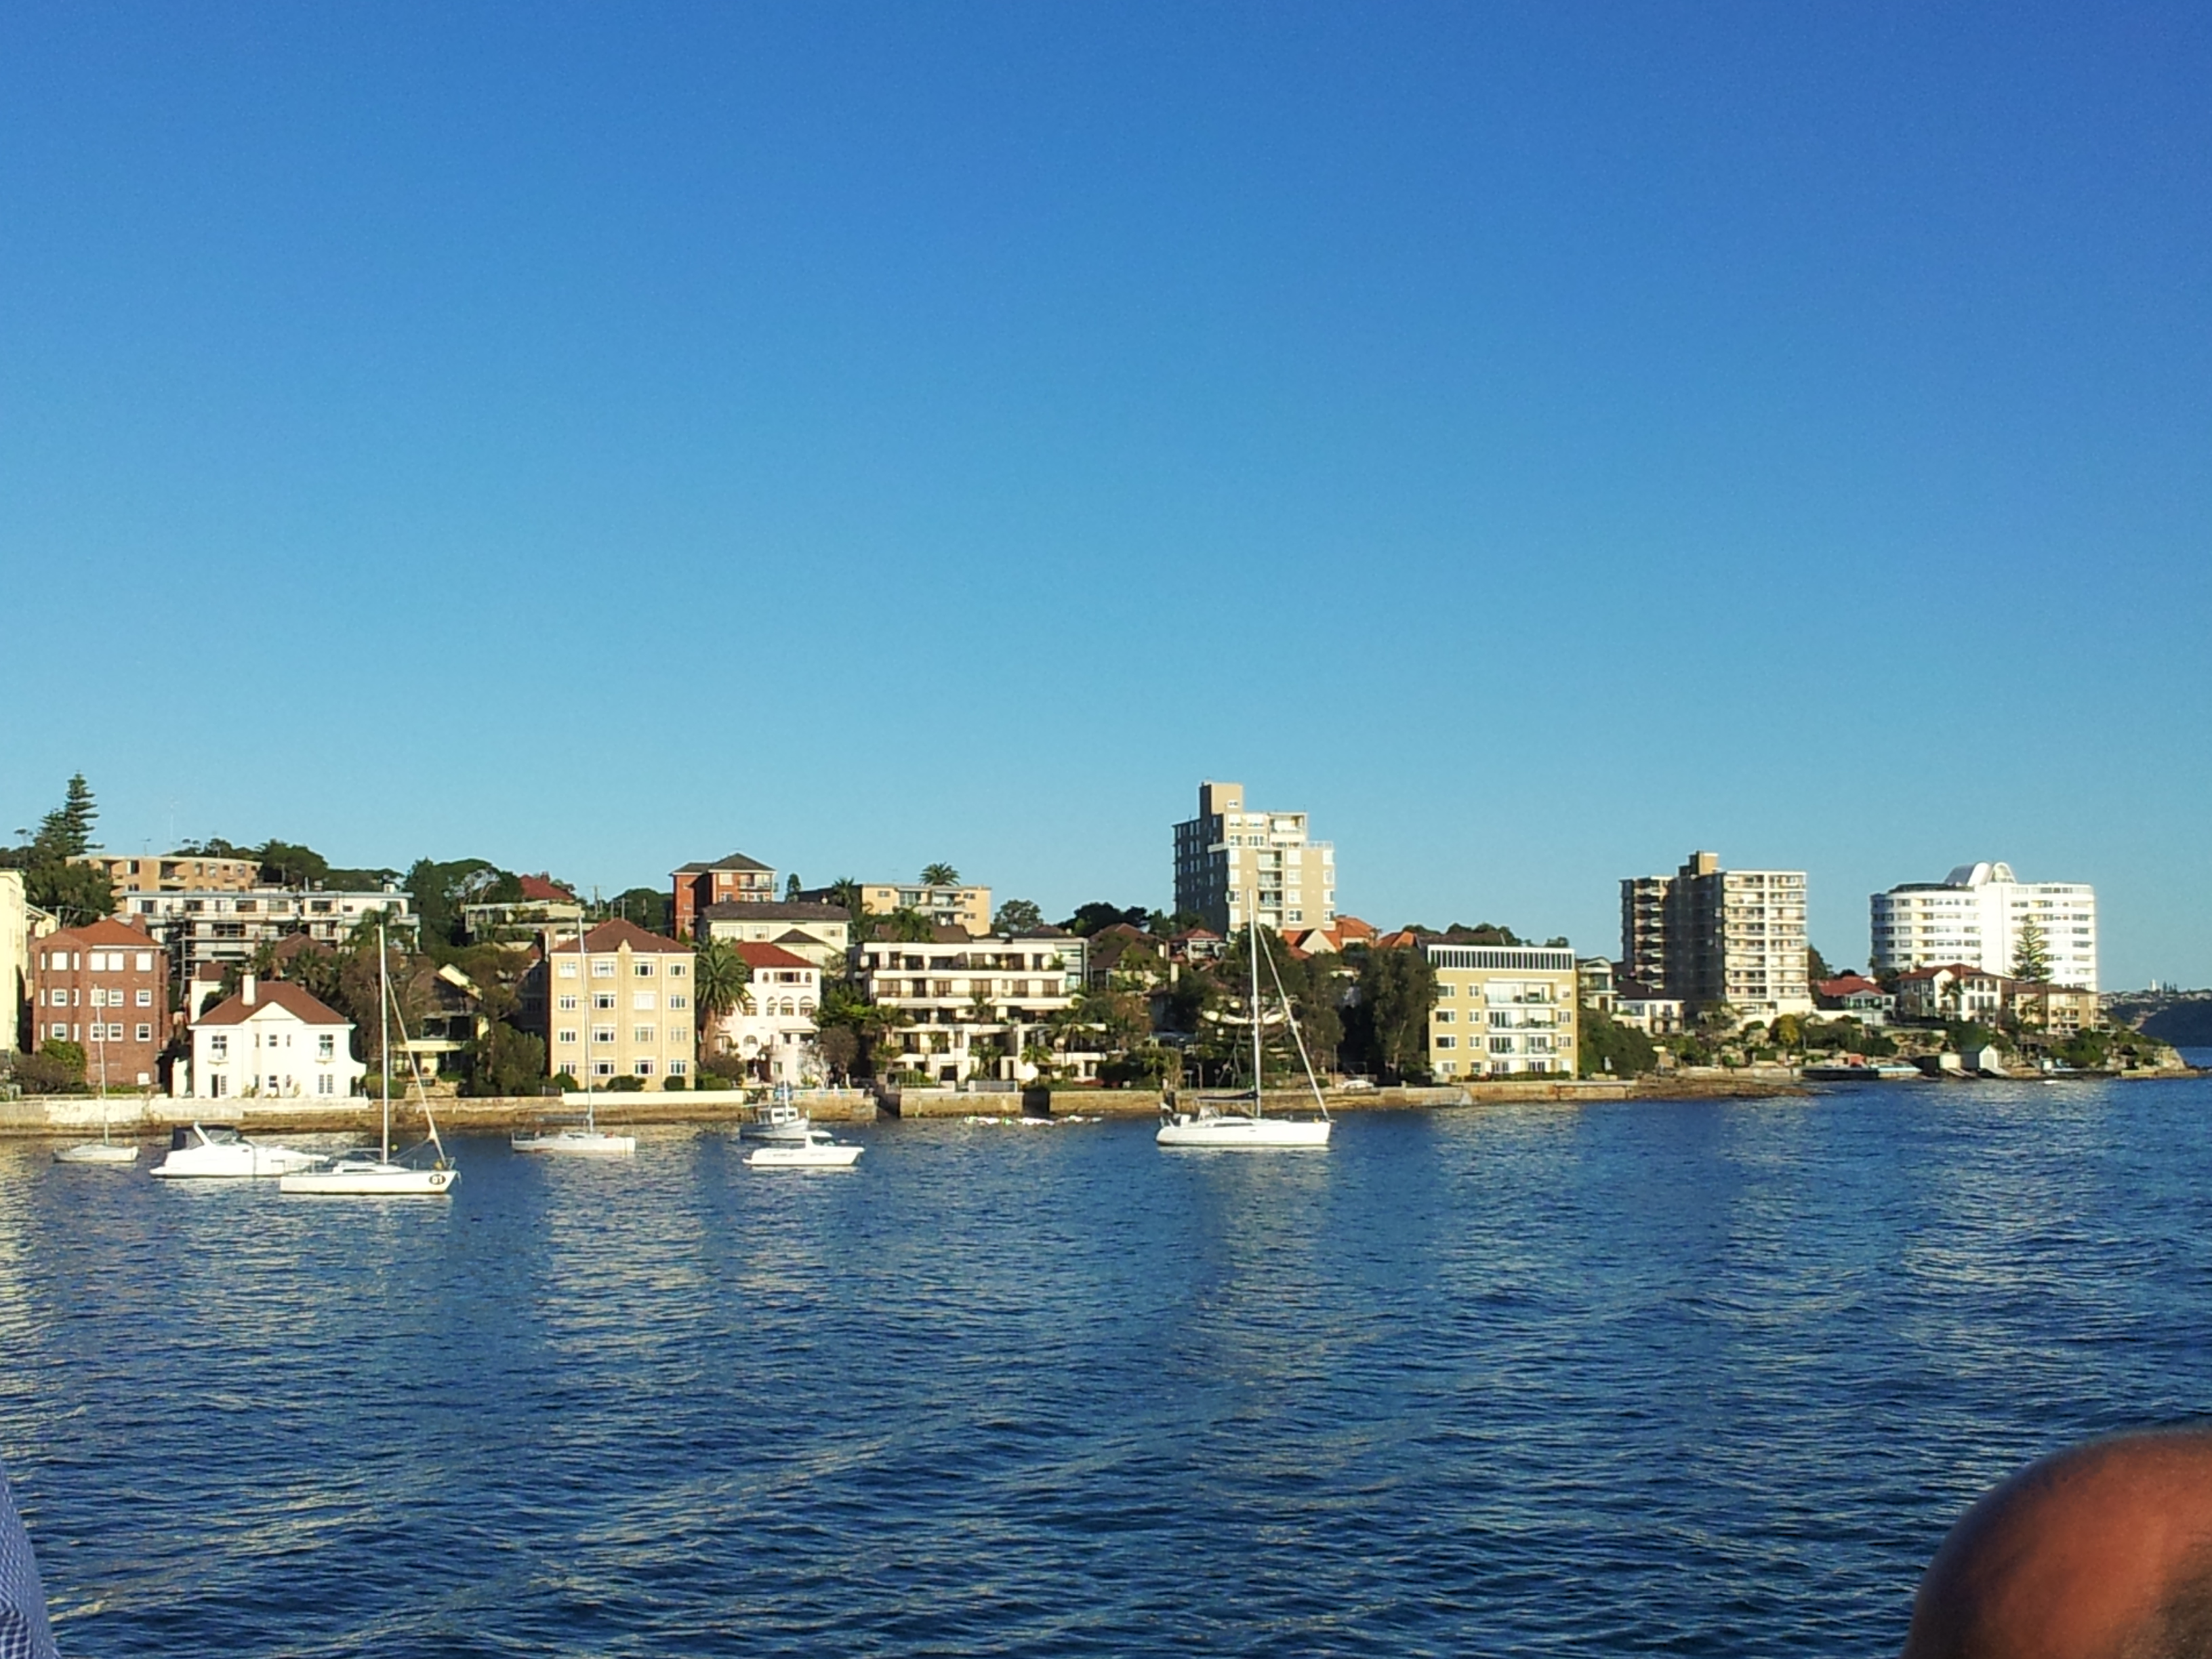 My first glimpse of Manly suburb. Heard great things about it.